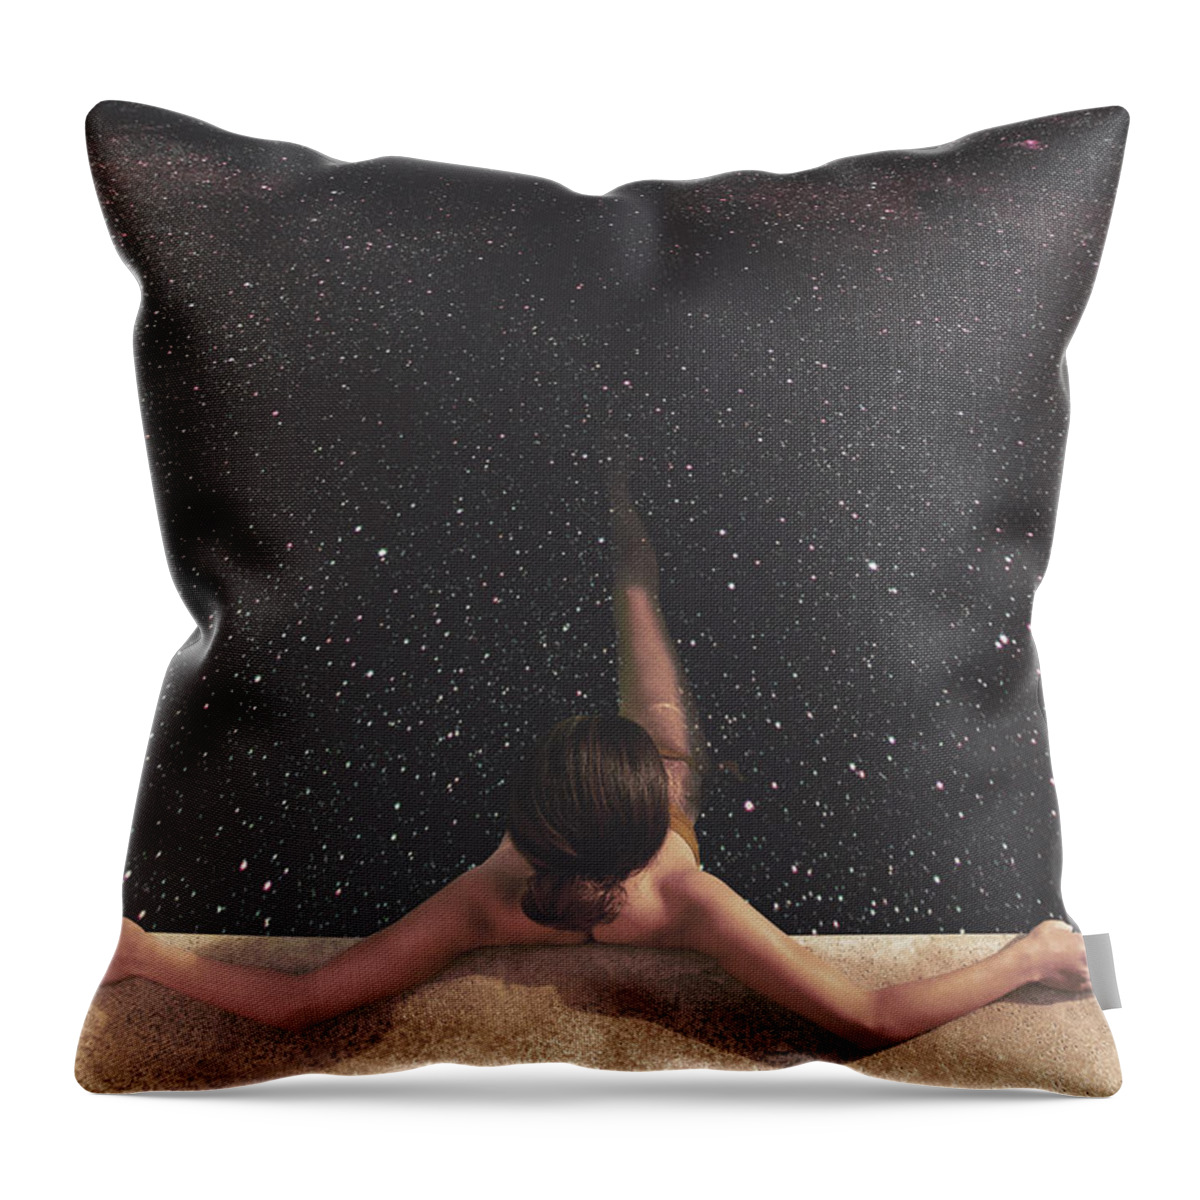 #faatoppicks Throw Pillow featuring the photograph Holynight by Fran Rodriguez